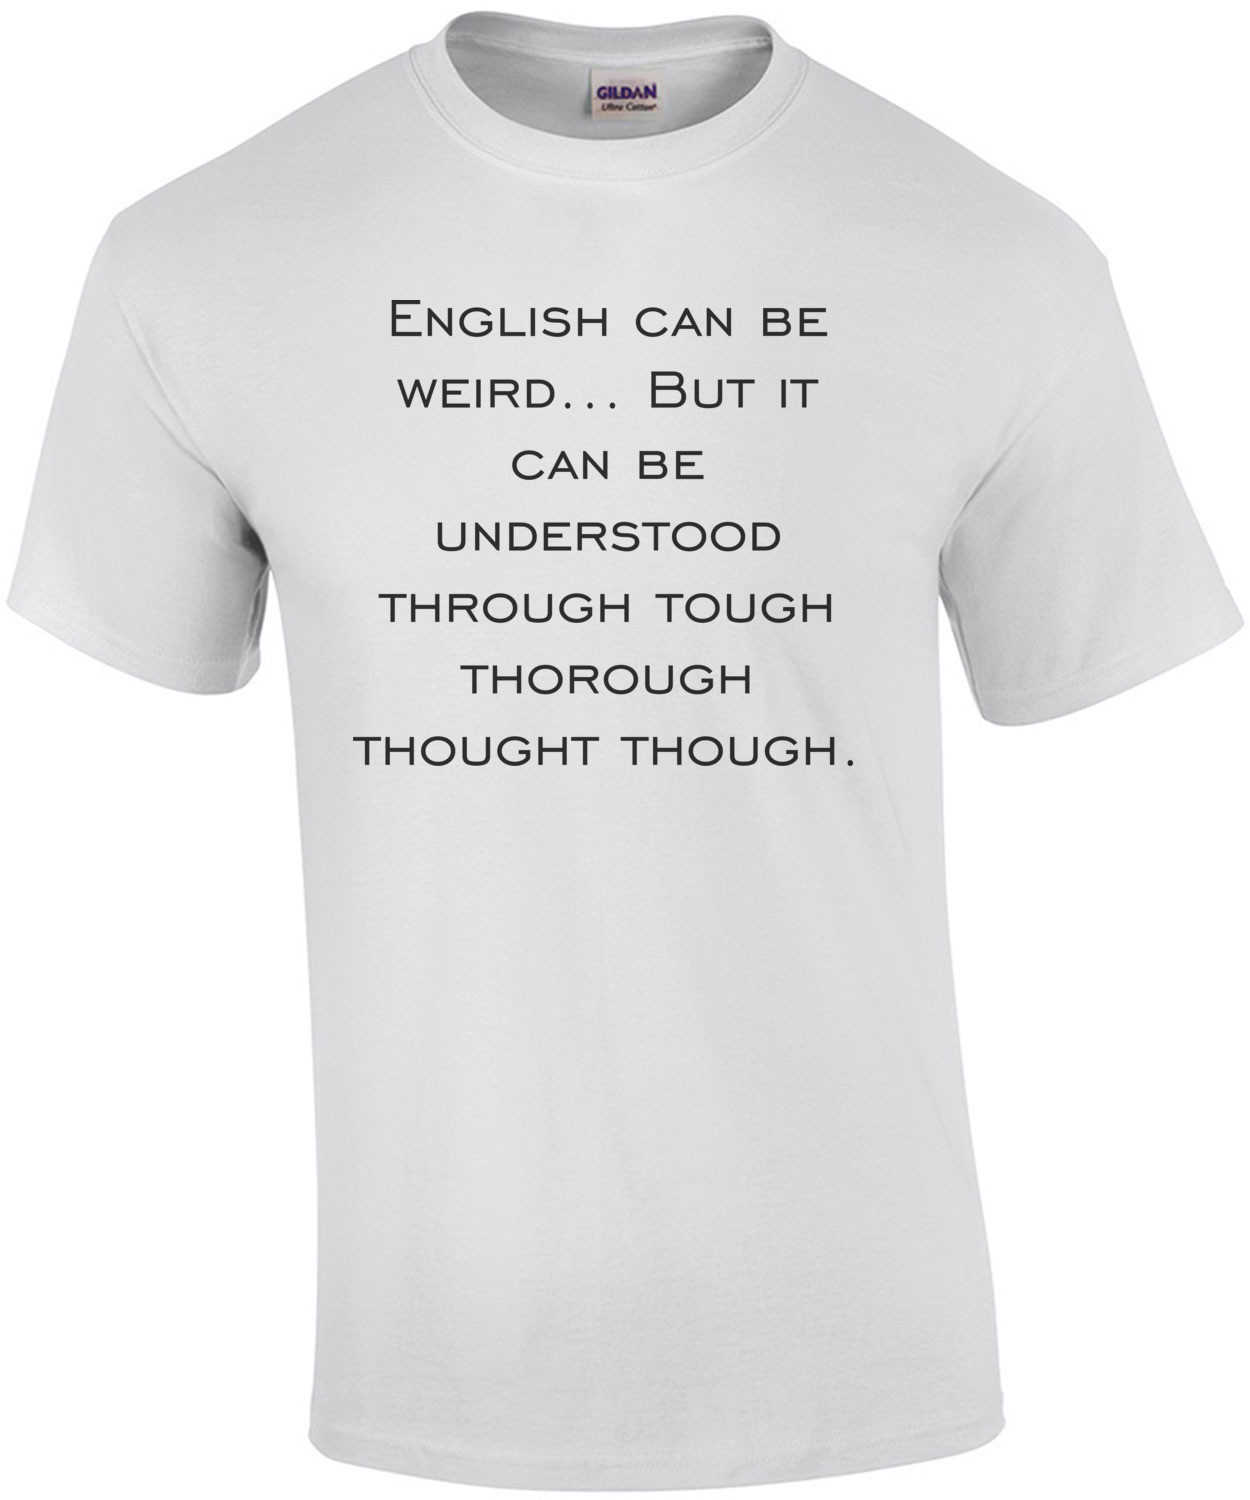 English can be weird... But it can be understood through tough thorough thought though. Funny